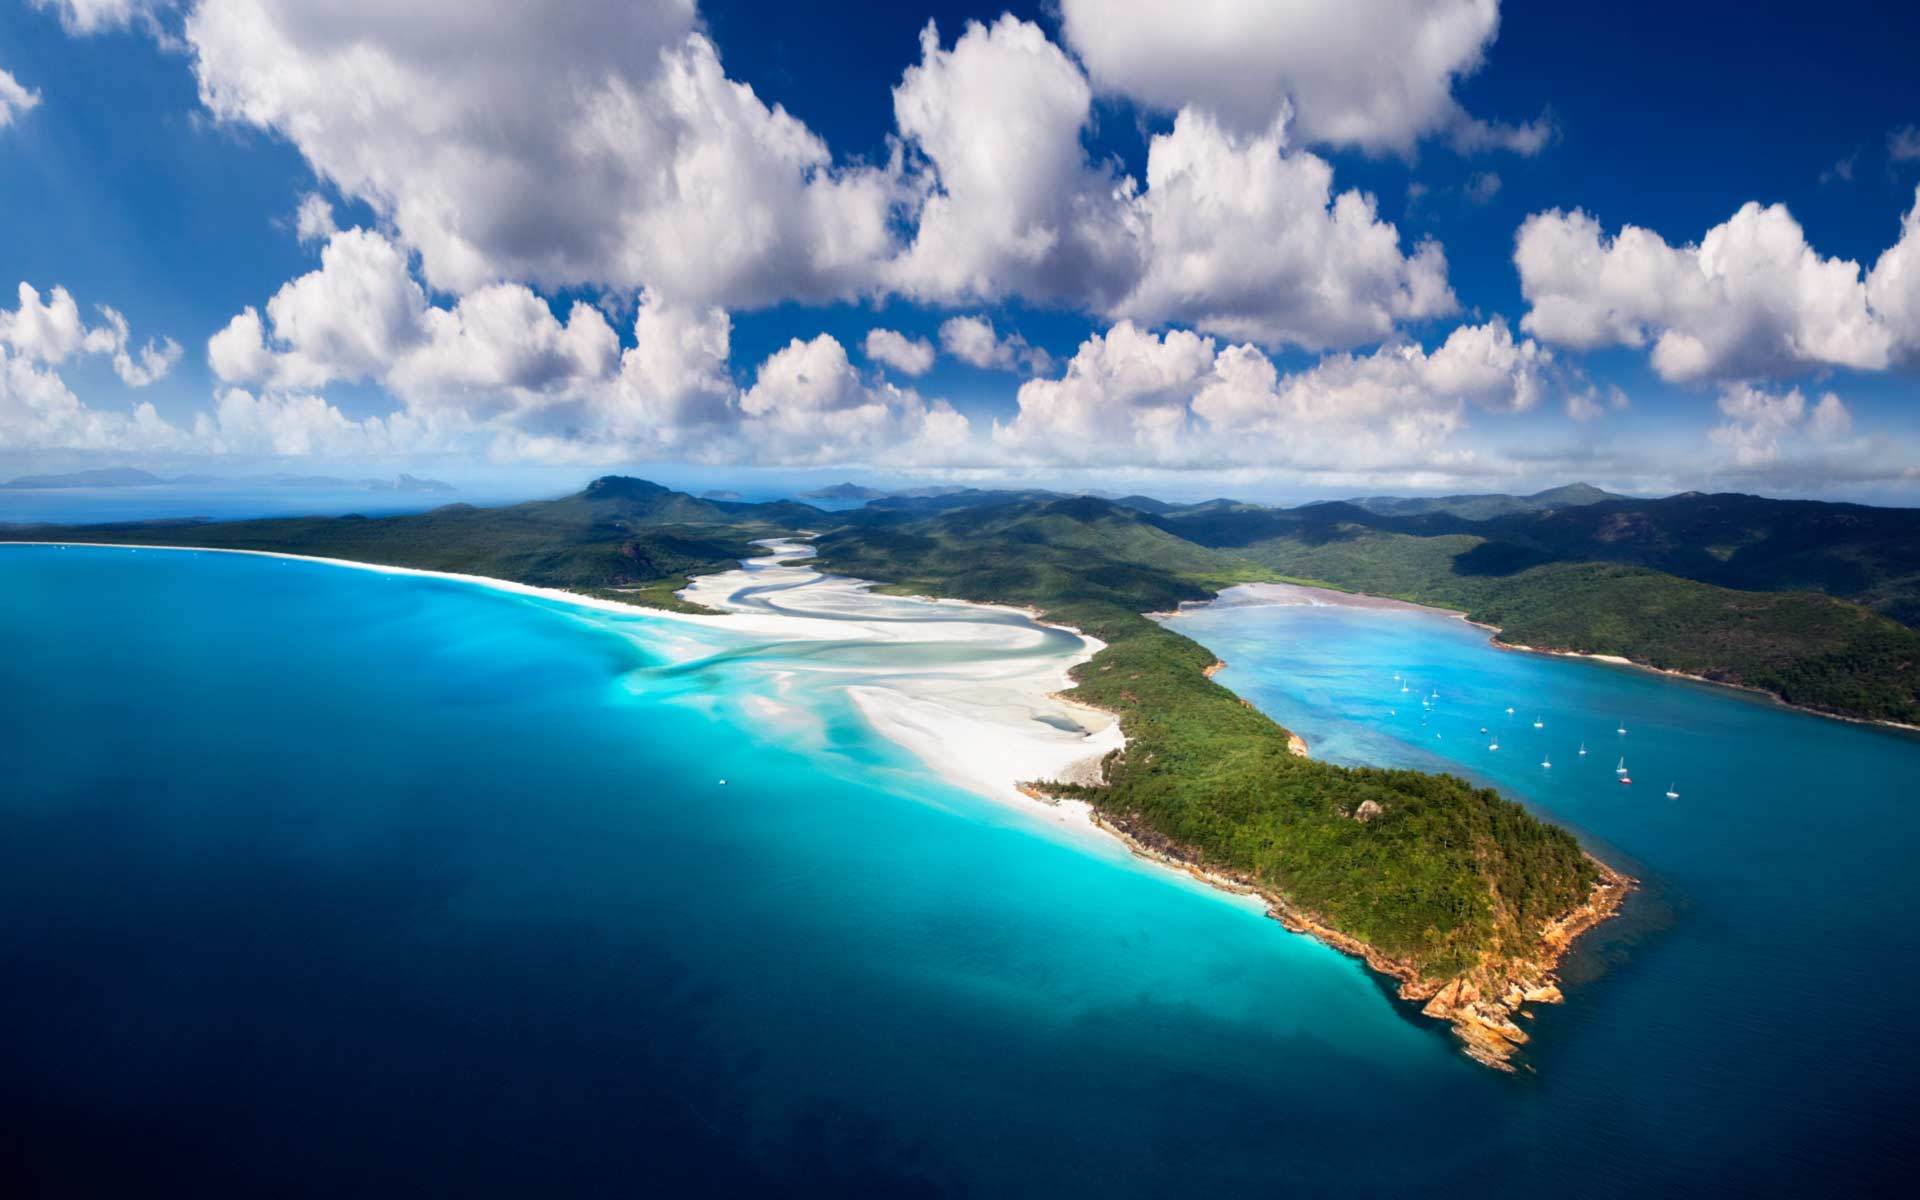 Whitehaven beach at Withsunday Islands